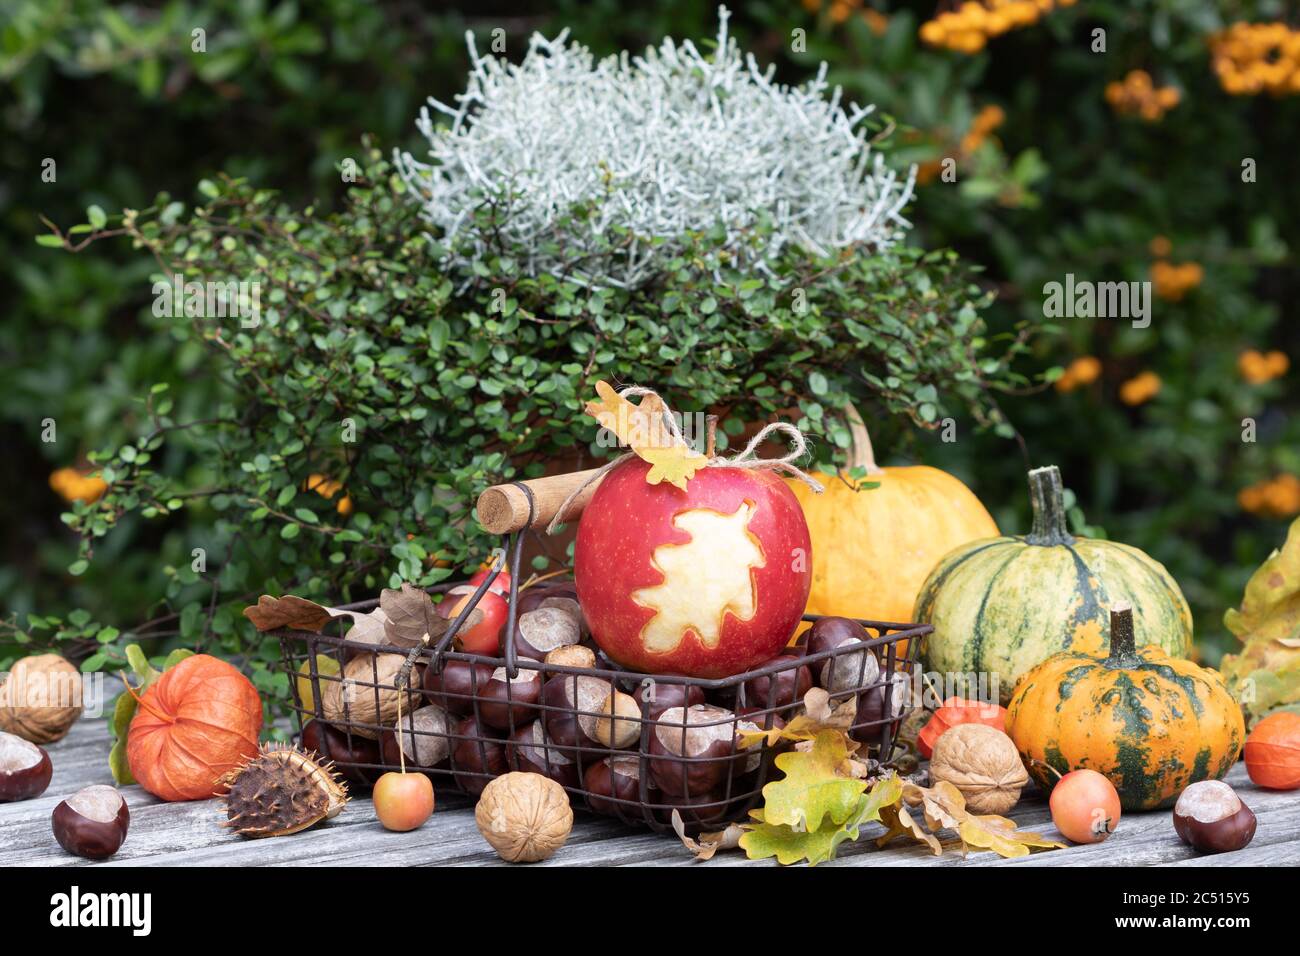 apple with oak leaf ornament, nuts and pumpkins as autumn decoration Stock Photo